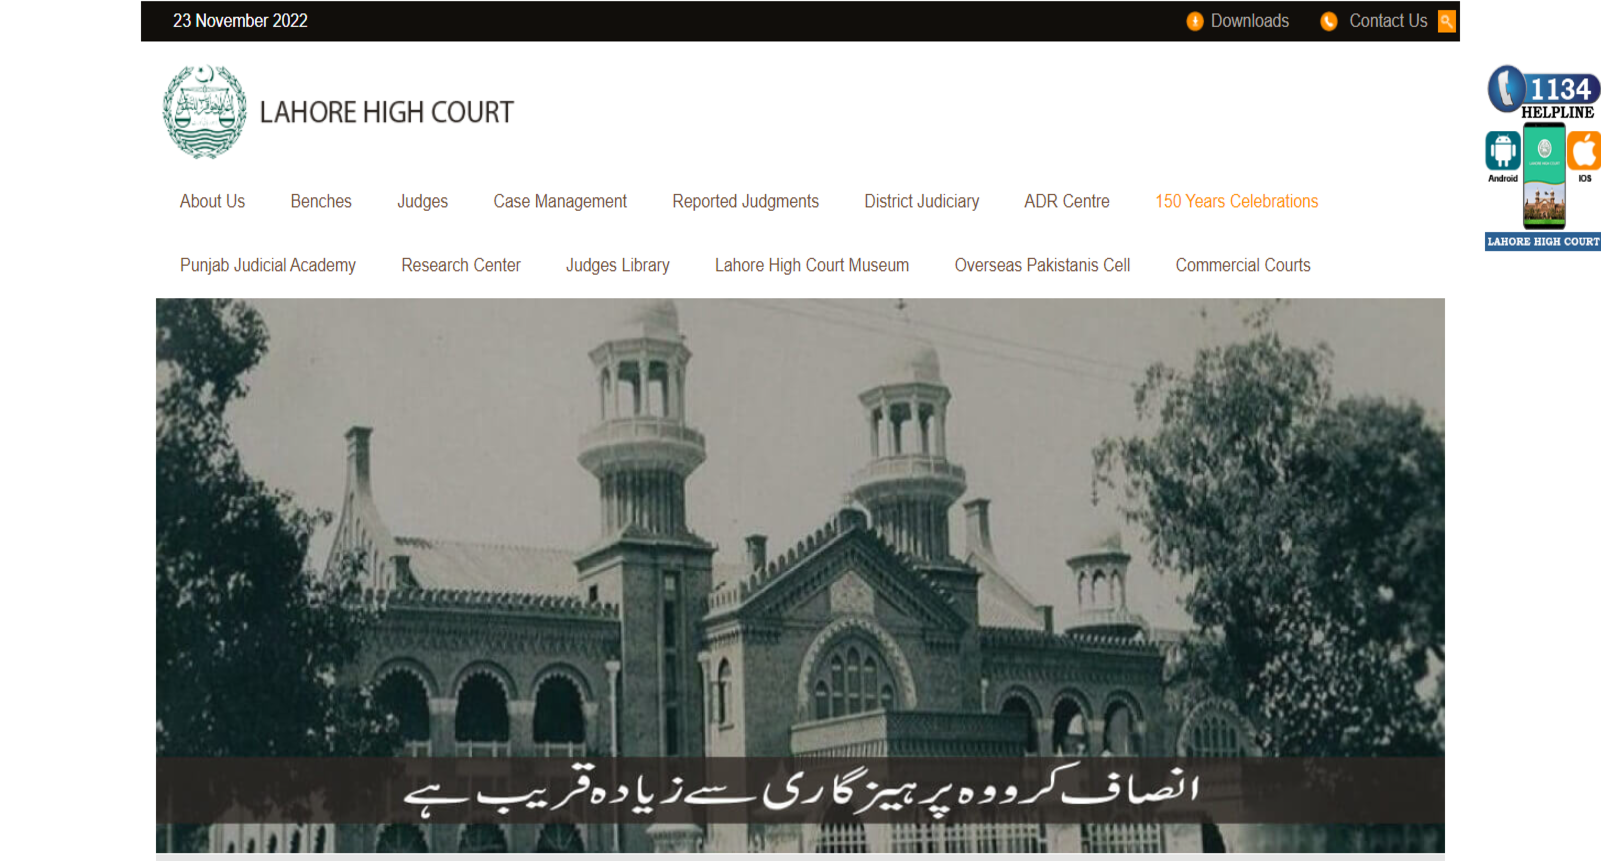 lahore_high_court_useful_link (1)